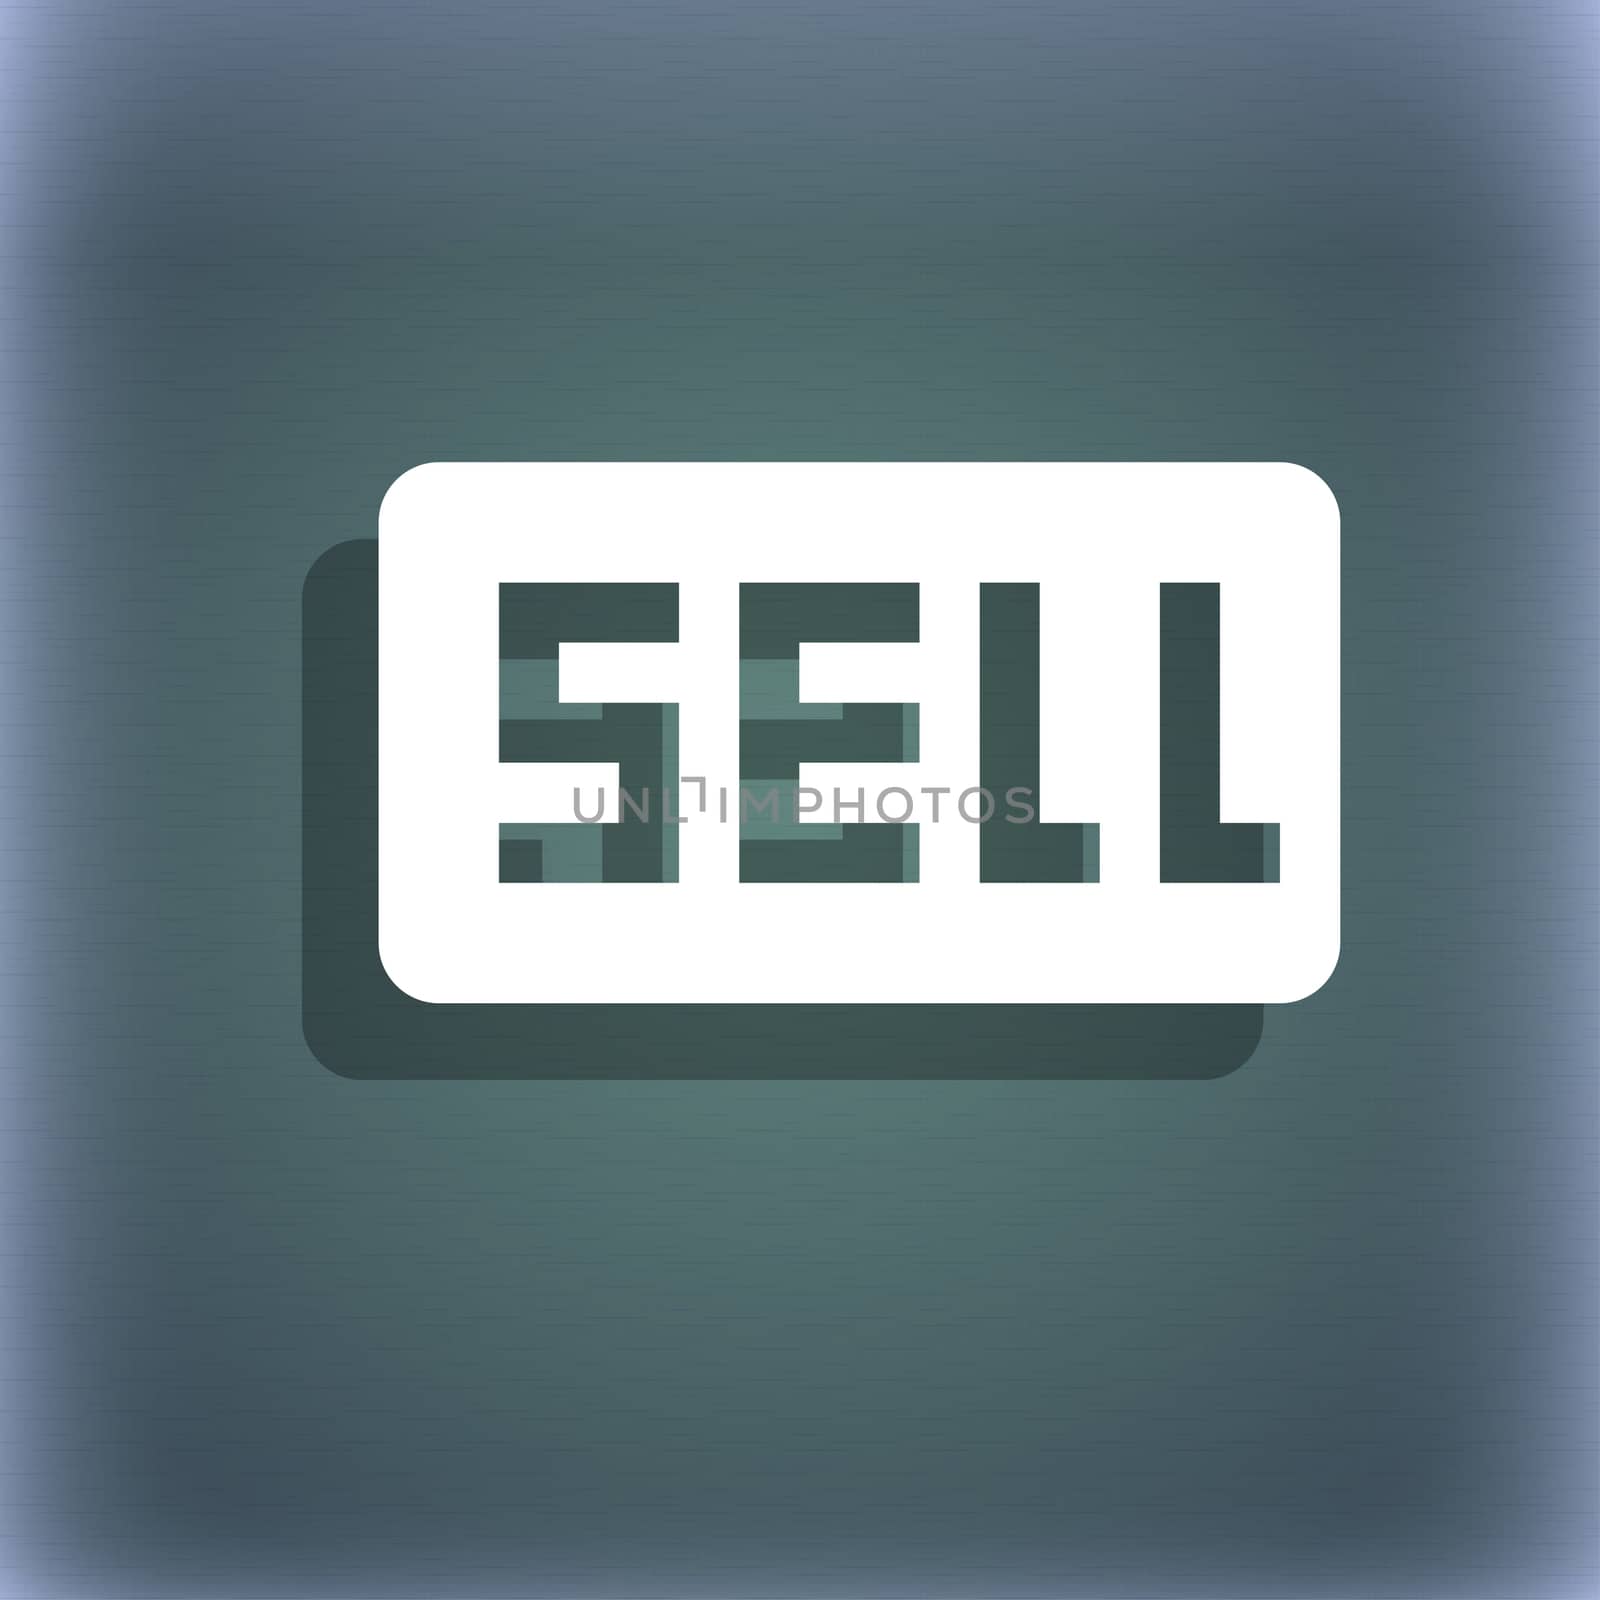 Sell, Contributor earnings icon symbol on the blue-green abstract background with shadow and space for your text. illustration